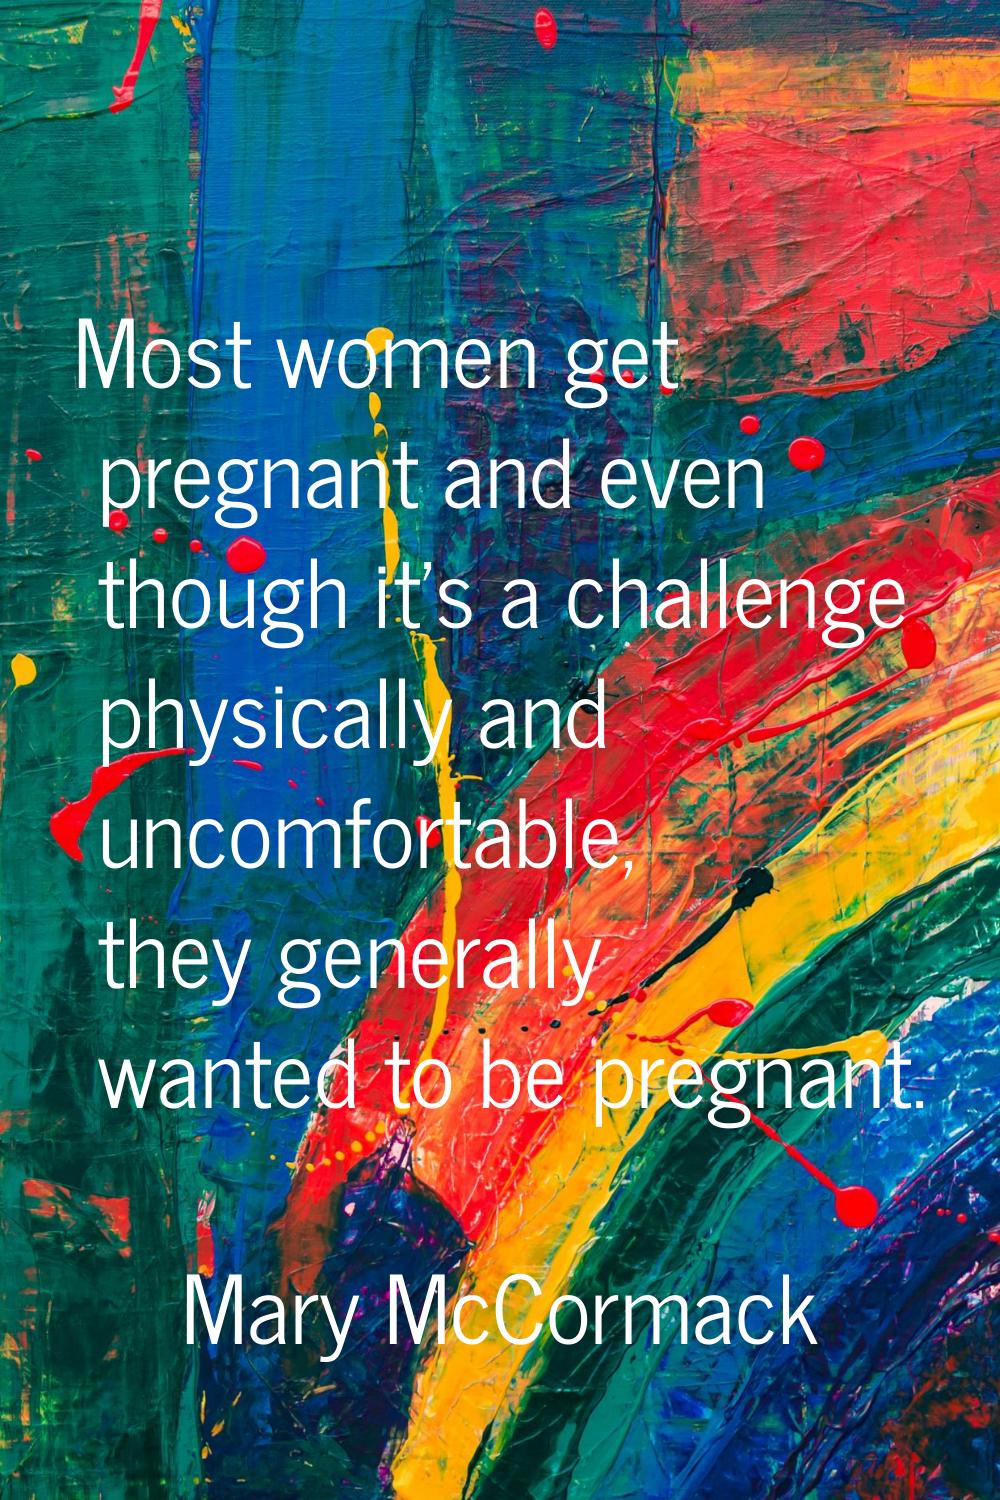 Most women get pregnant and even though it's a challenge physically and uncomfortable, they general